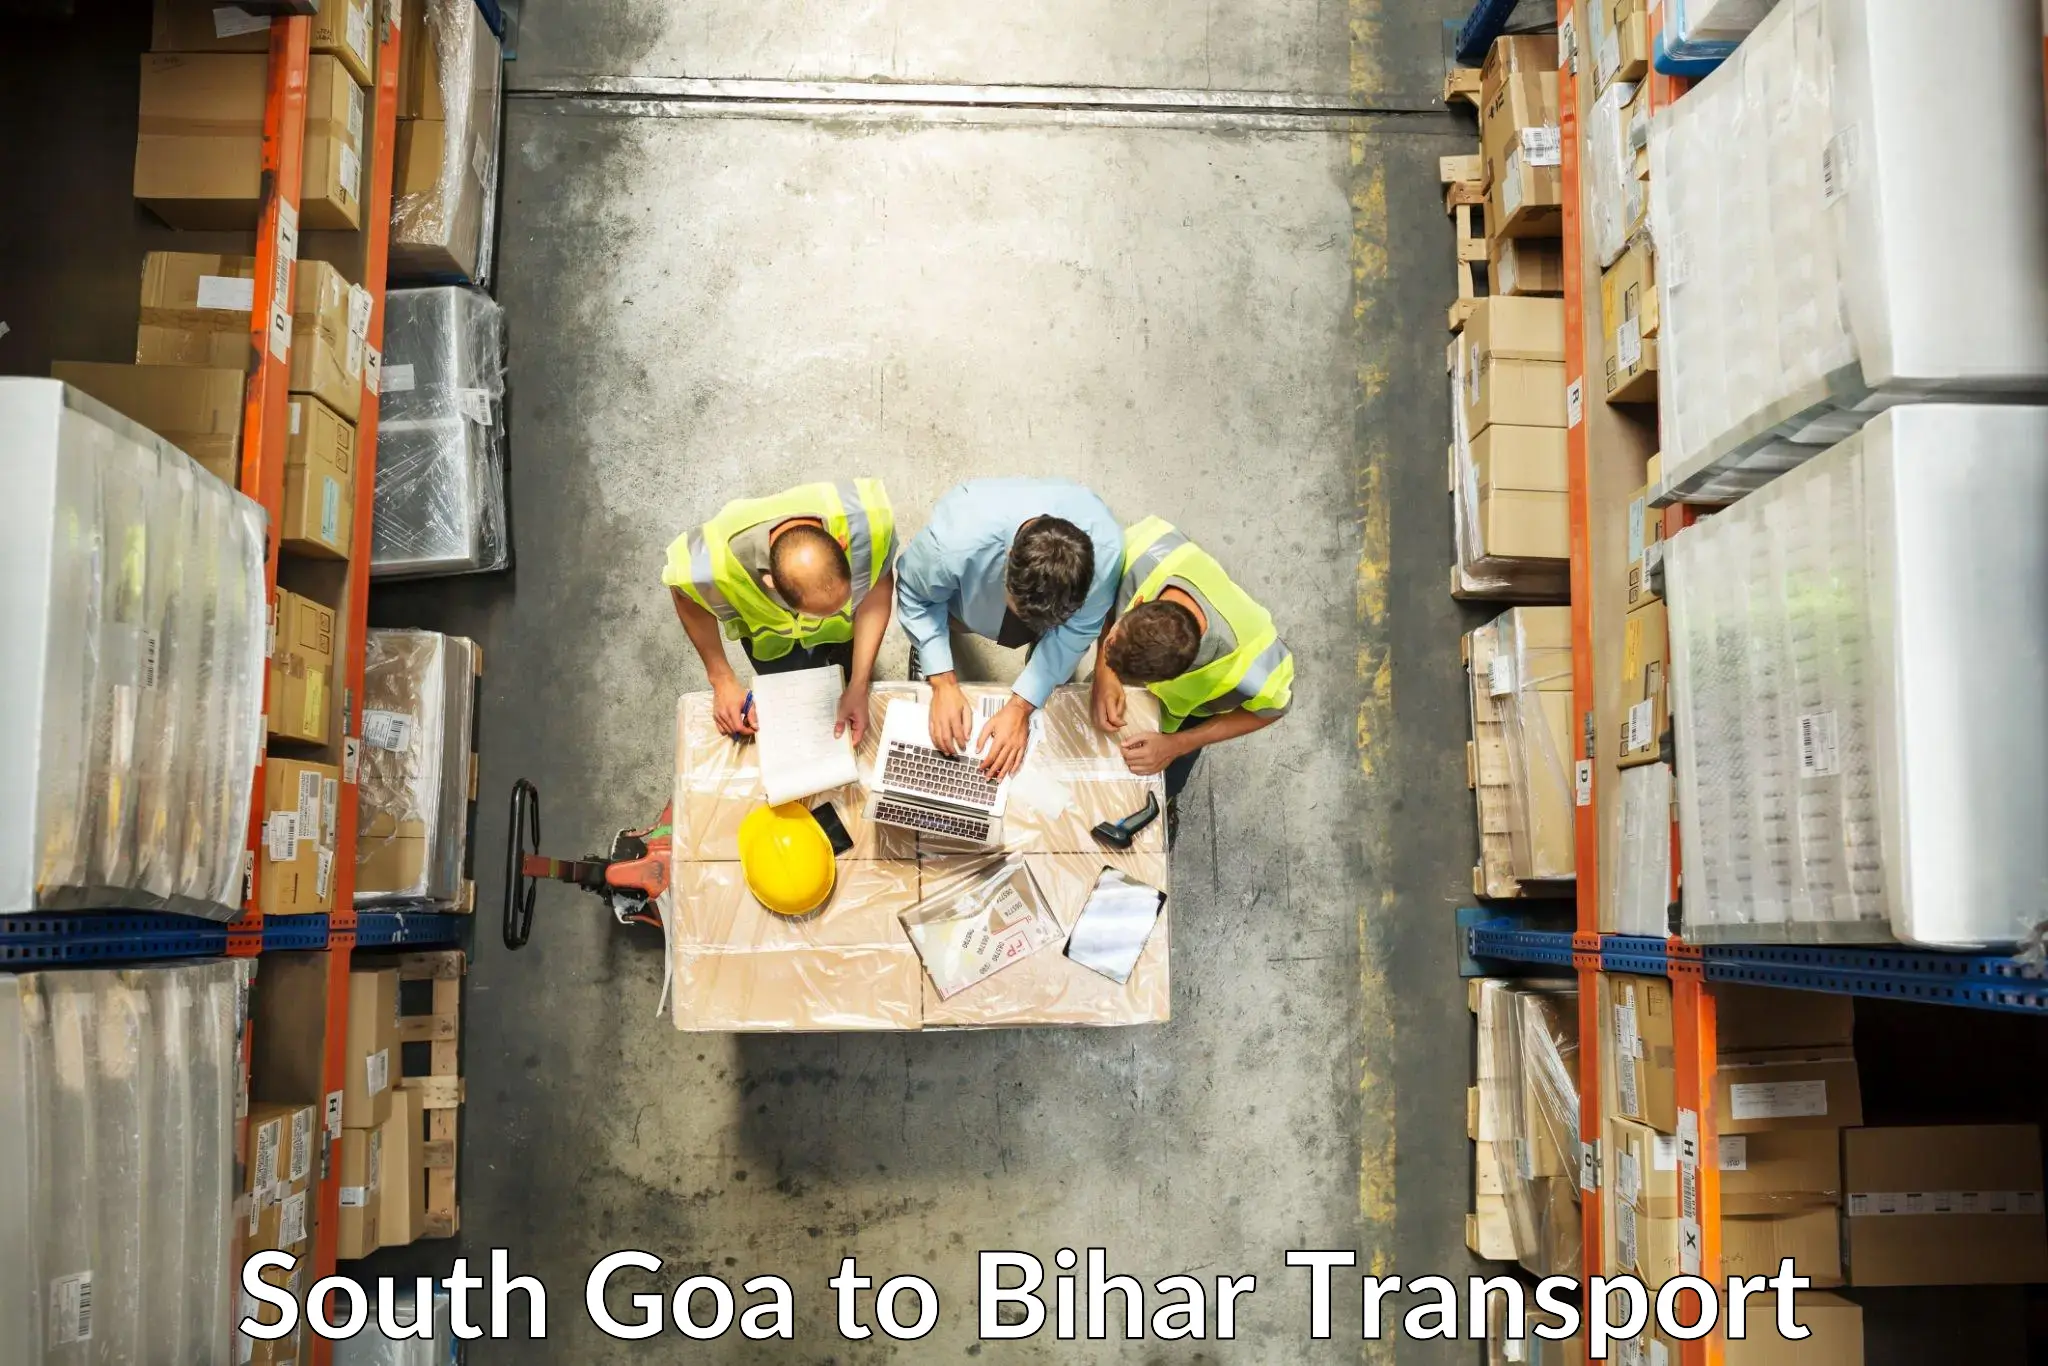 Part load transport service in India South Goa to Bhabua